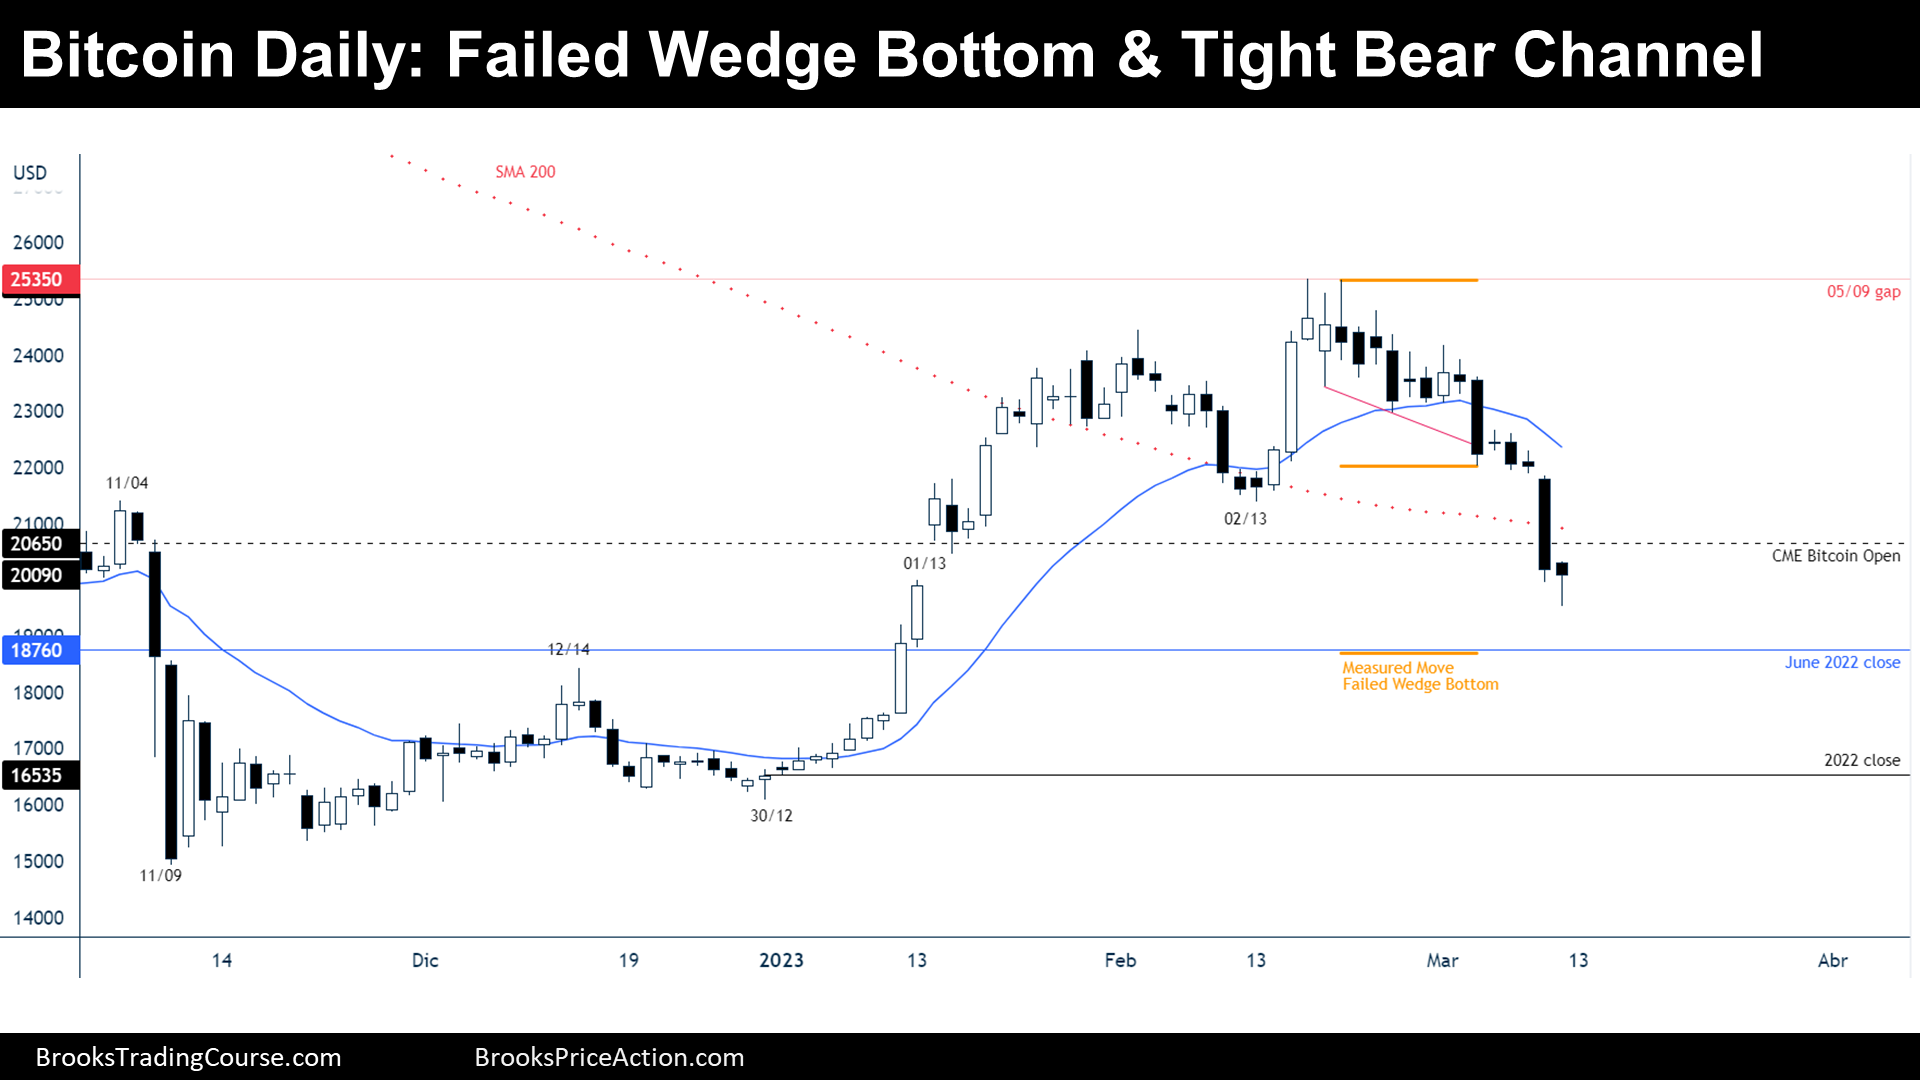 Bitcoin futures daily chart failed wedge bottom and tight bear channel